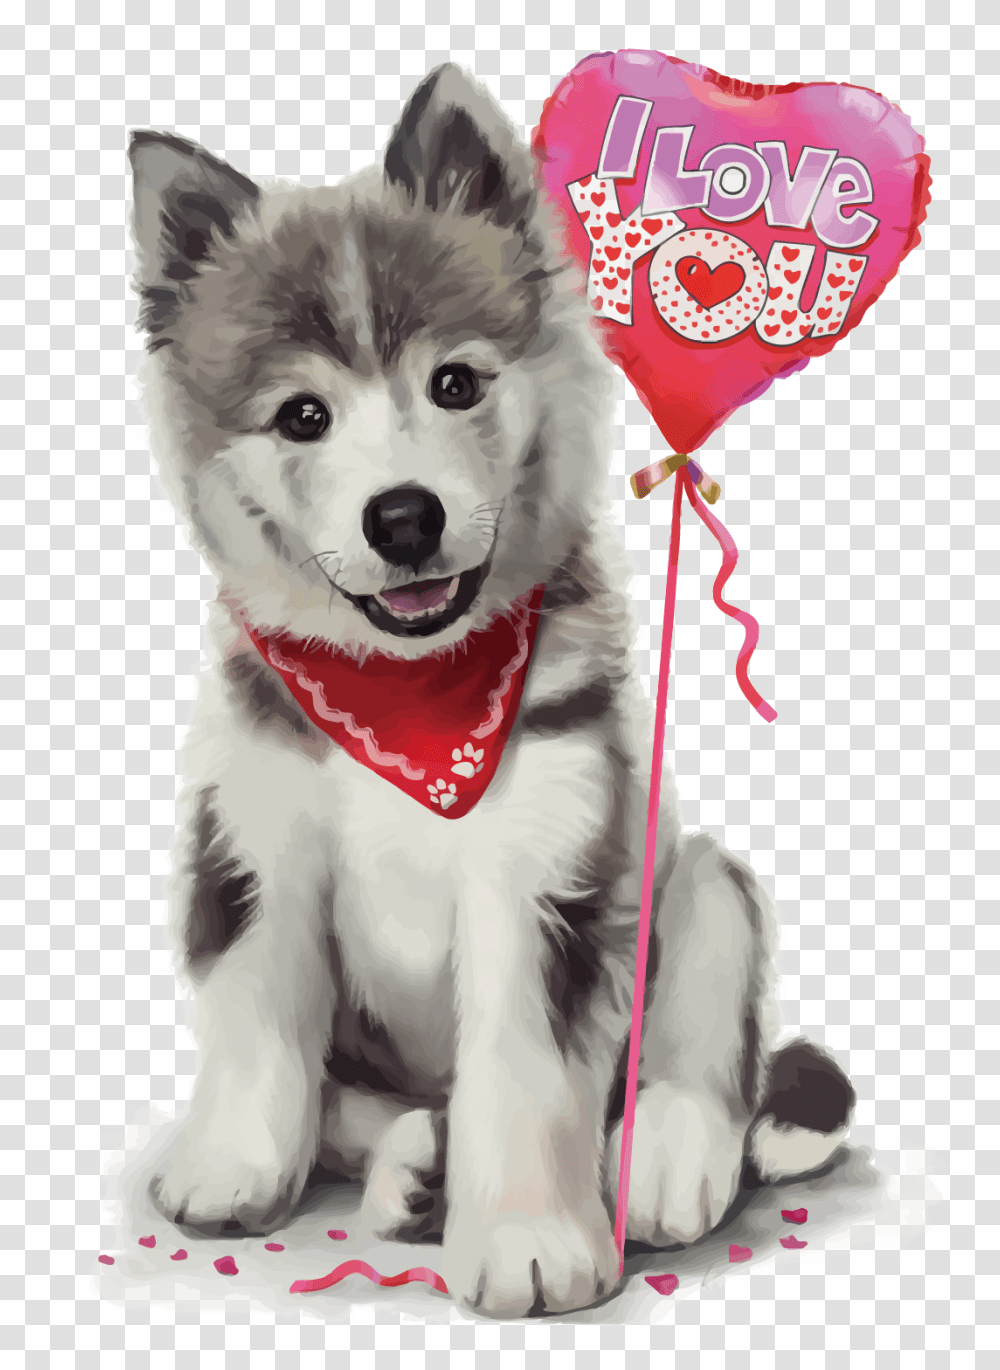 Husky Puppy With Heart Image Husky Love, Clothing, Apparel, Dog, Pet Transparent Png